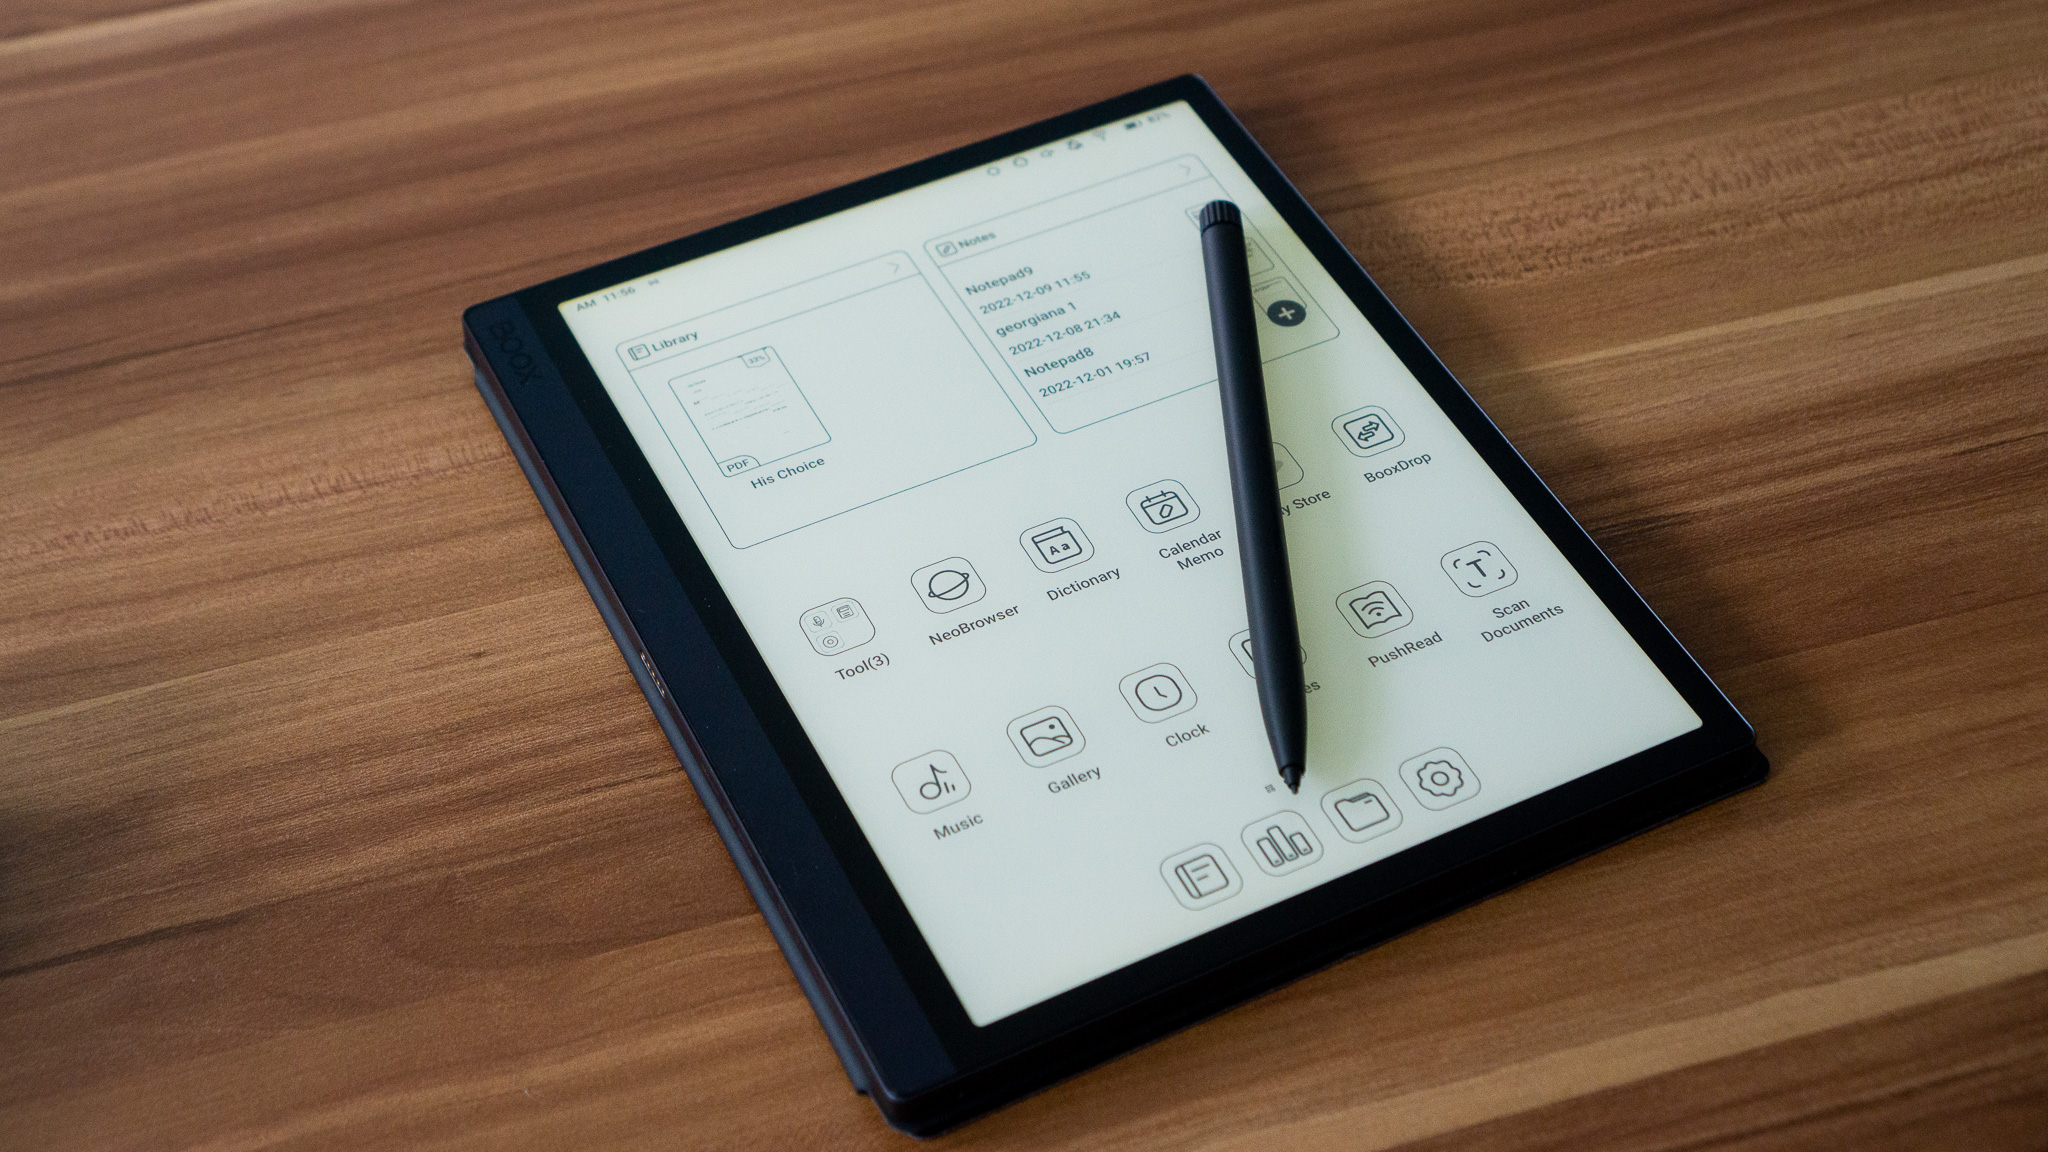 The best e-ink tablet I've tested was not made by Amazon or